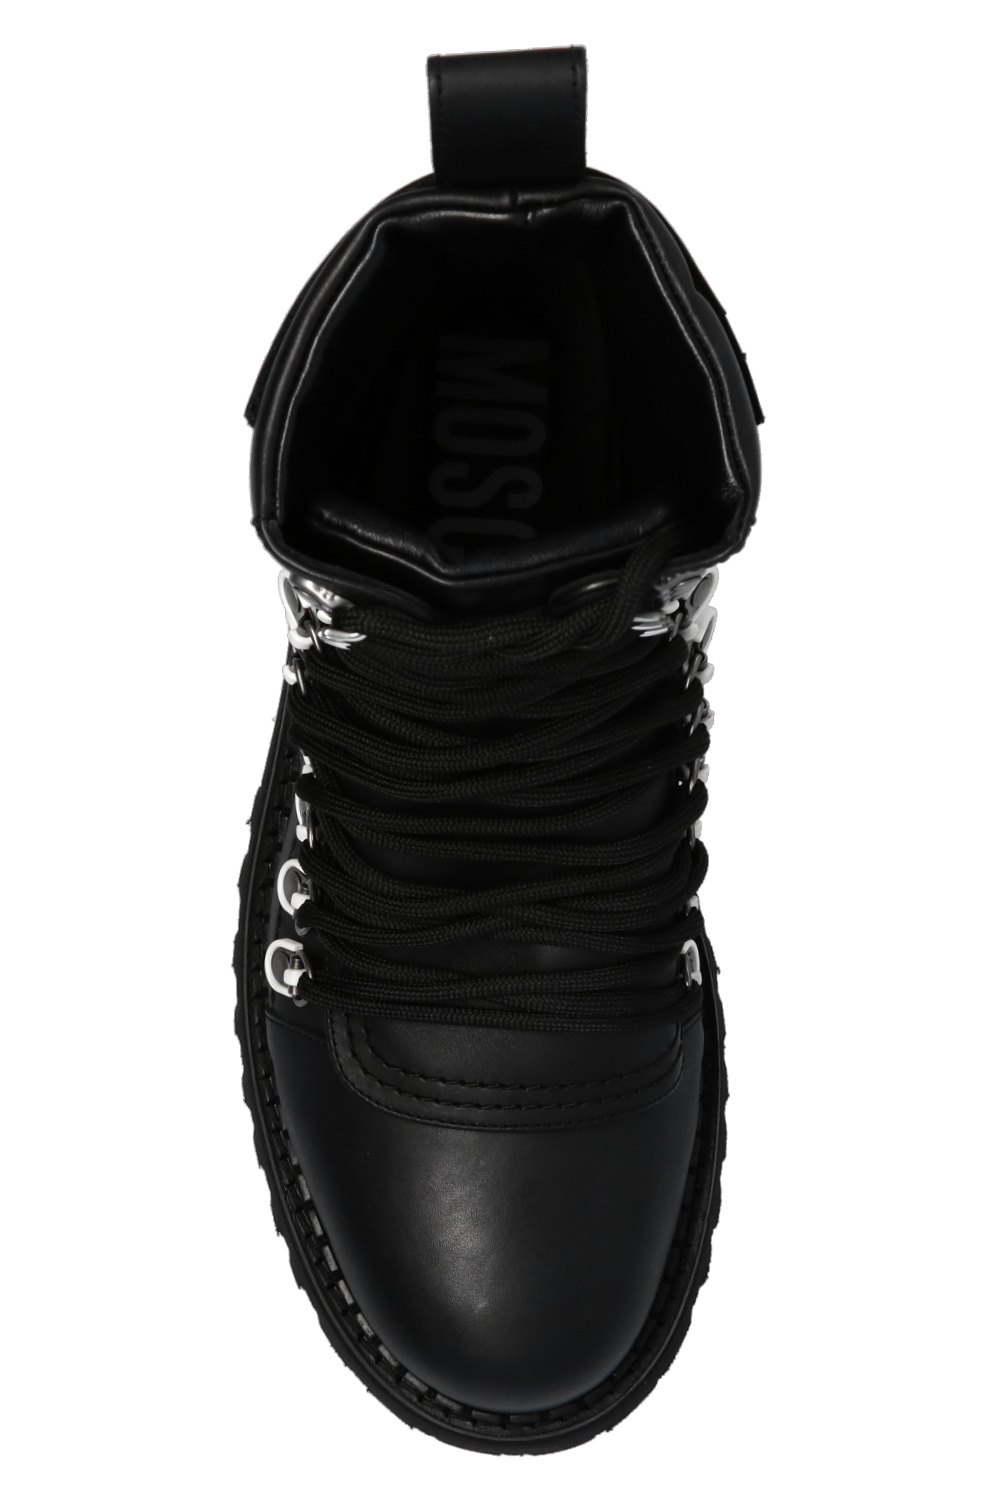 Moschino Leather boots